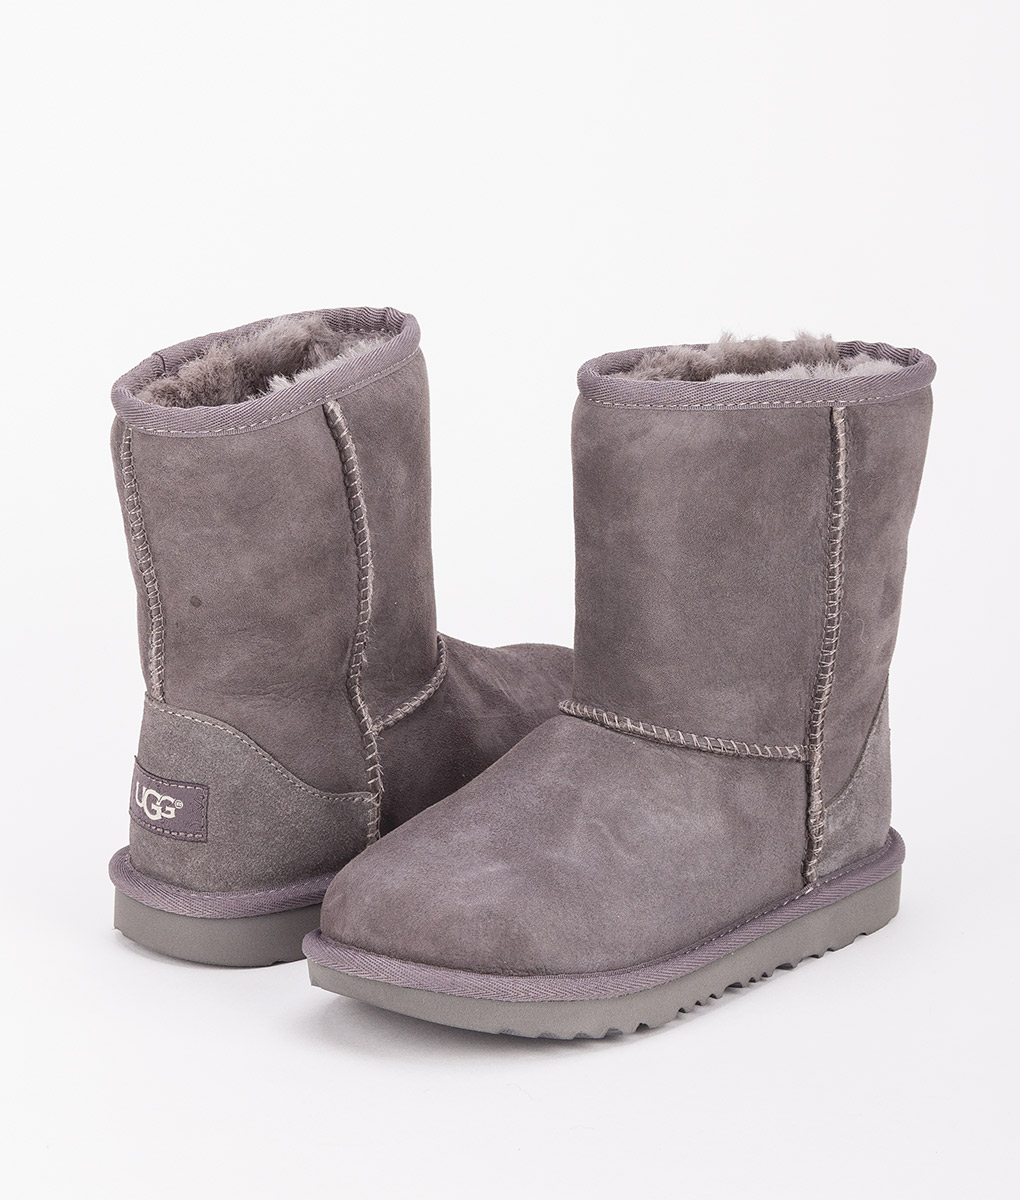 UGG Kids Ankle Boots 1017703K CLASSIC II, Grey 1